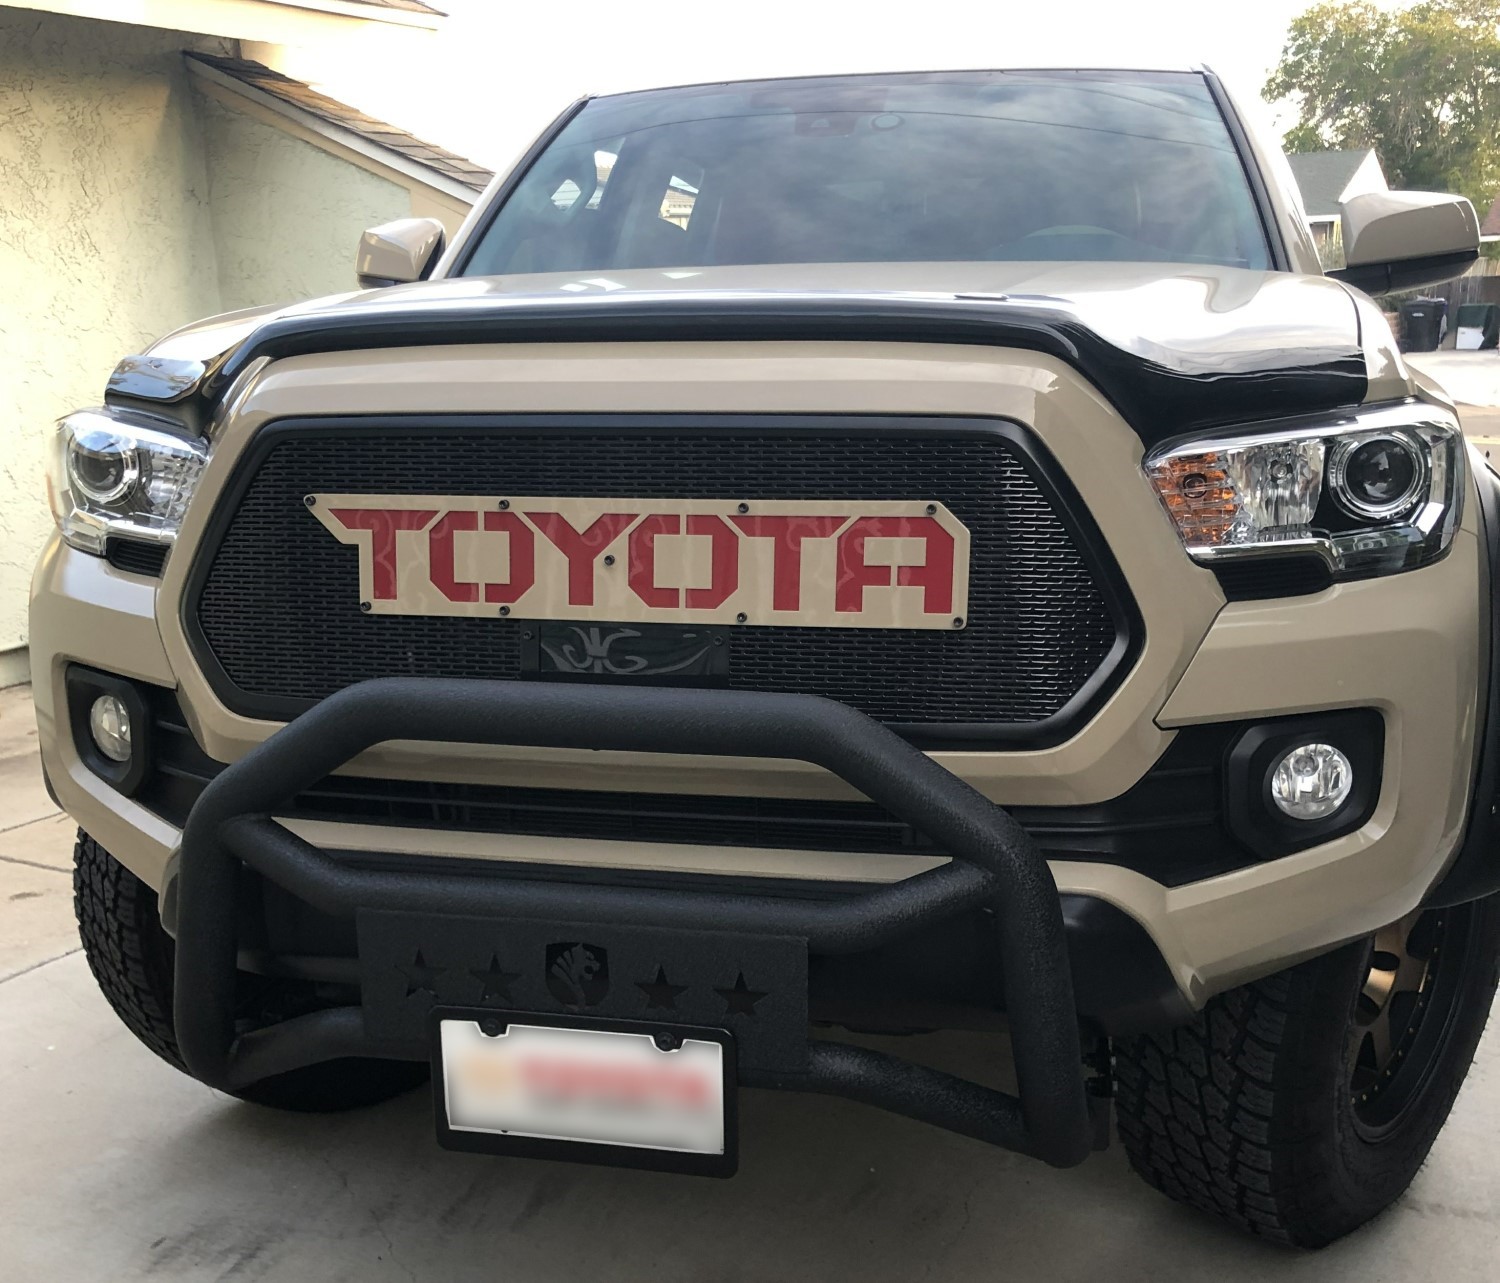 Make a Statement: Red and Quicksand Two-Tone Letters for Toyota Tacoma Grille